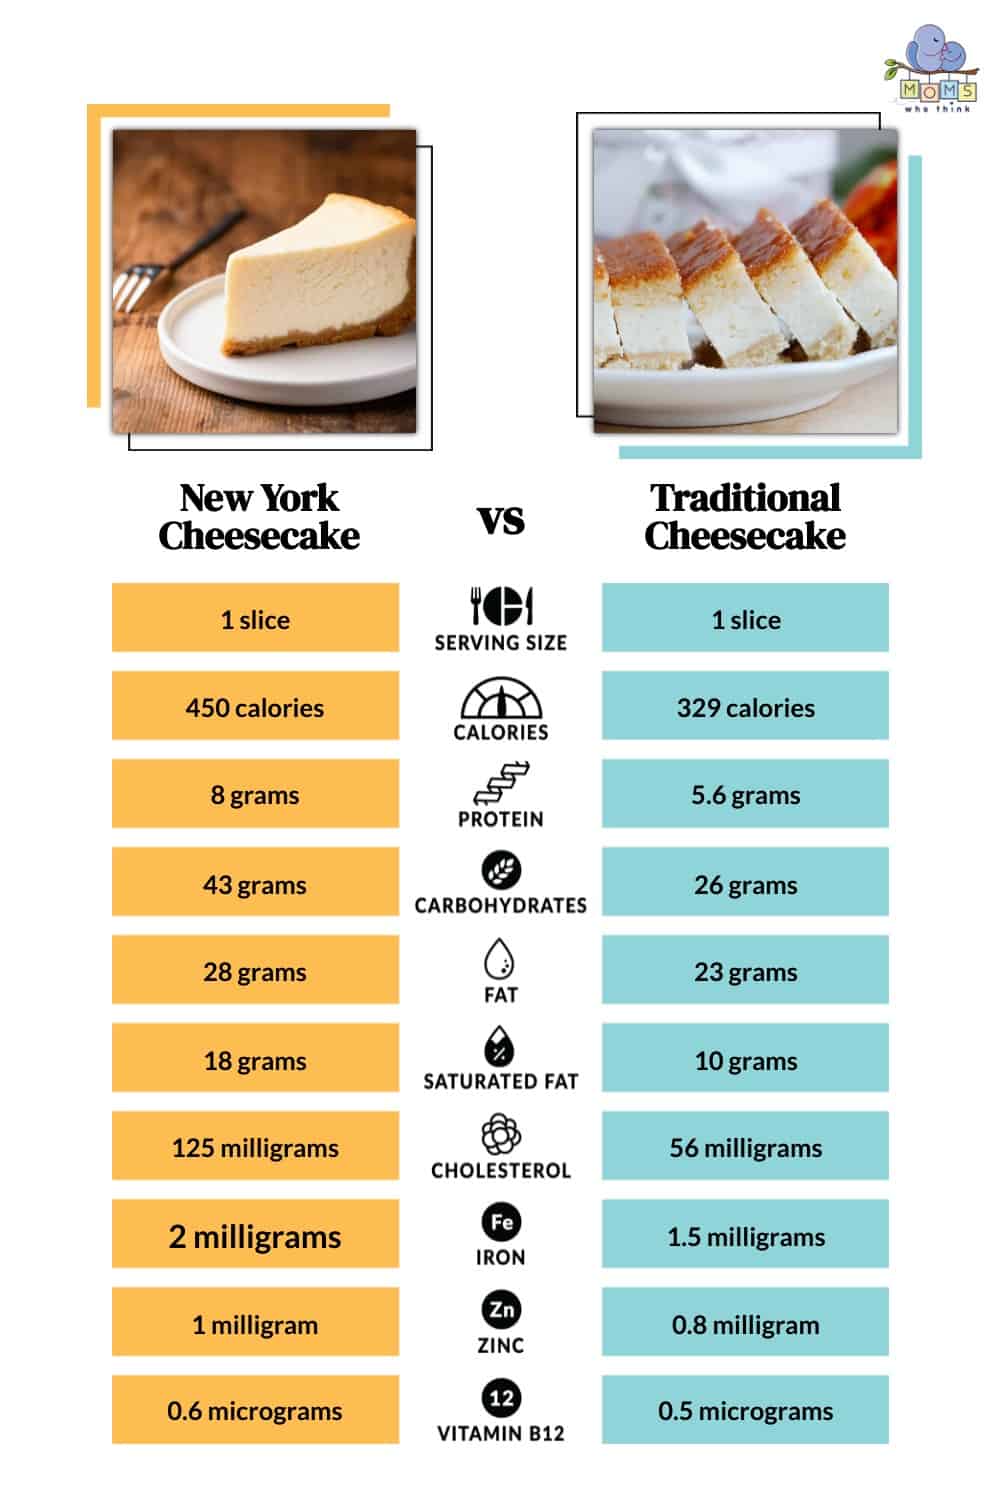 New York Cheesecake vs Traditional Cheesecake: Which is Healthier